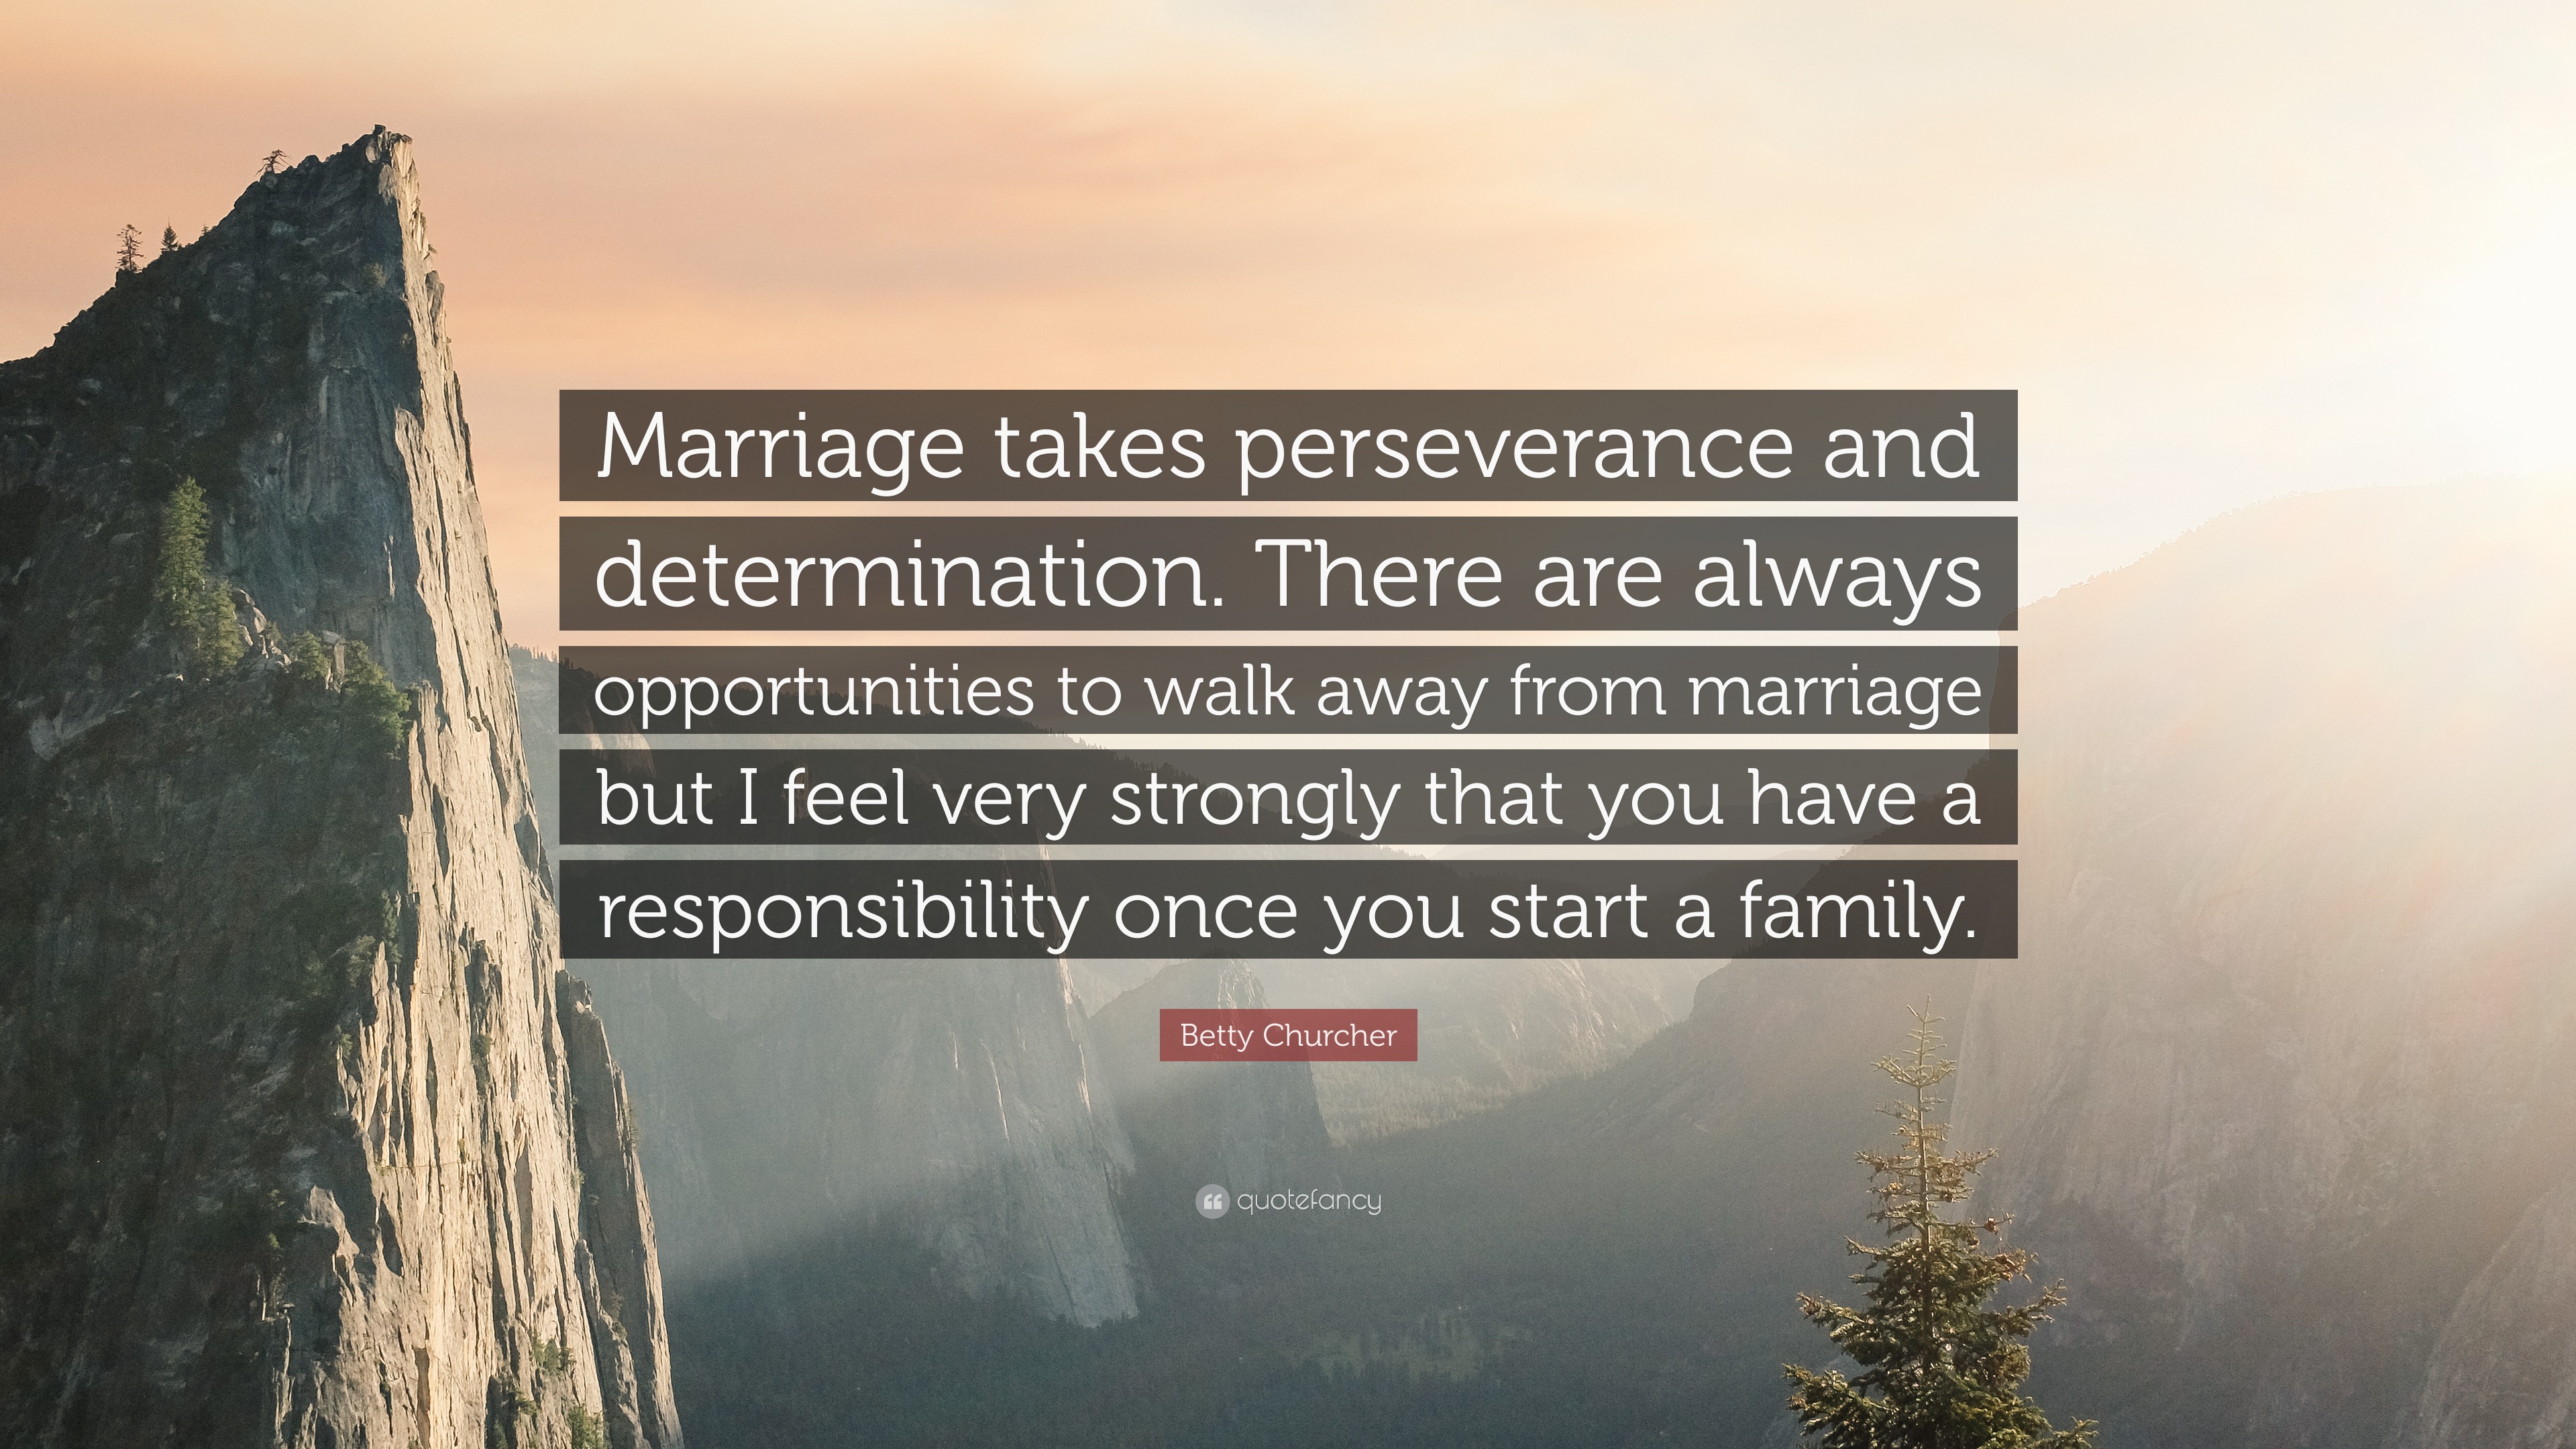 Betty Churcher Quote Marriage Takes Perseverance And Determination There Are Always Opportunities To Walk Away From Marriage But I Feel Very 7 Wallpapers Quotefancy